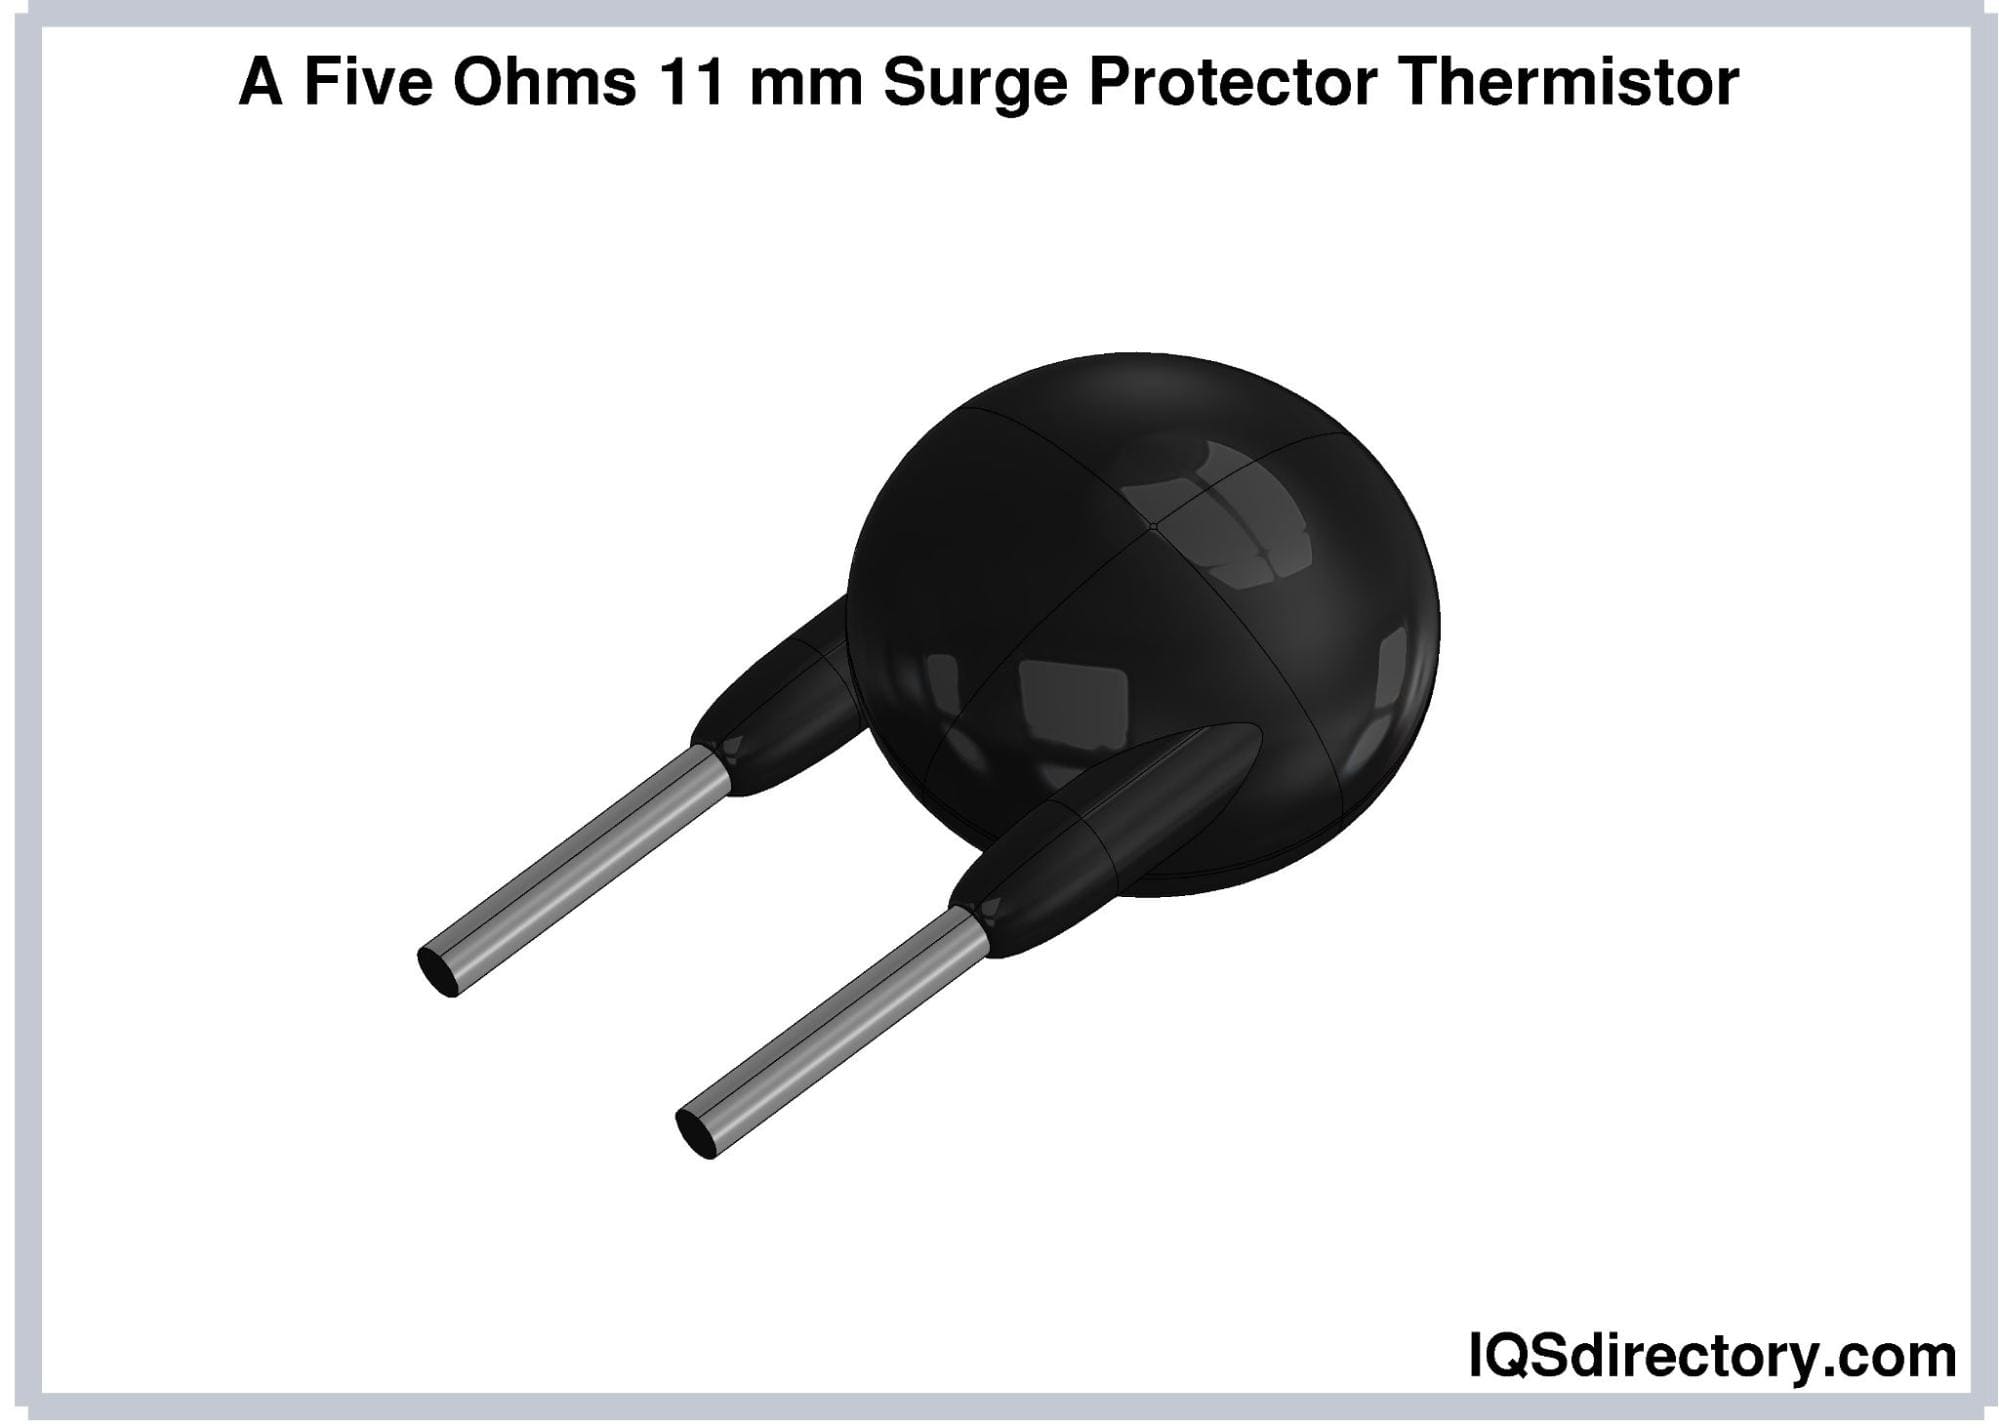 A Five Ohms 11 mm Surge Protector Thermistor